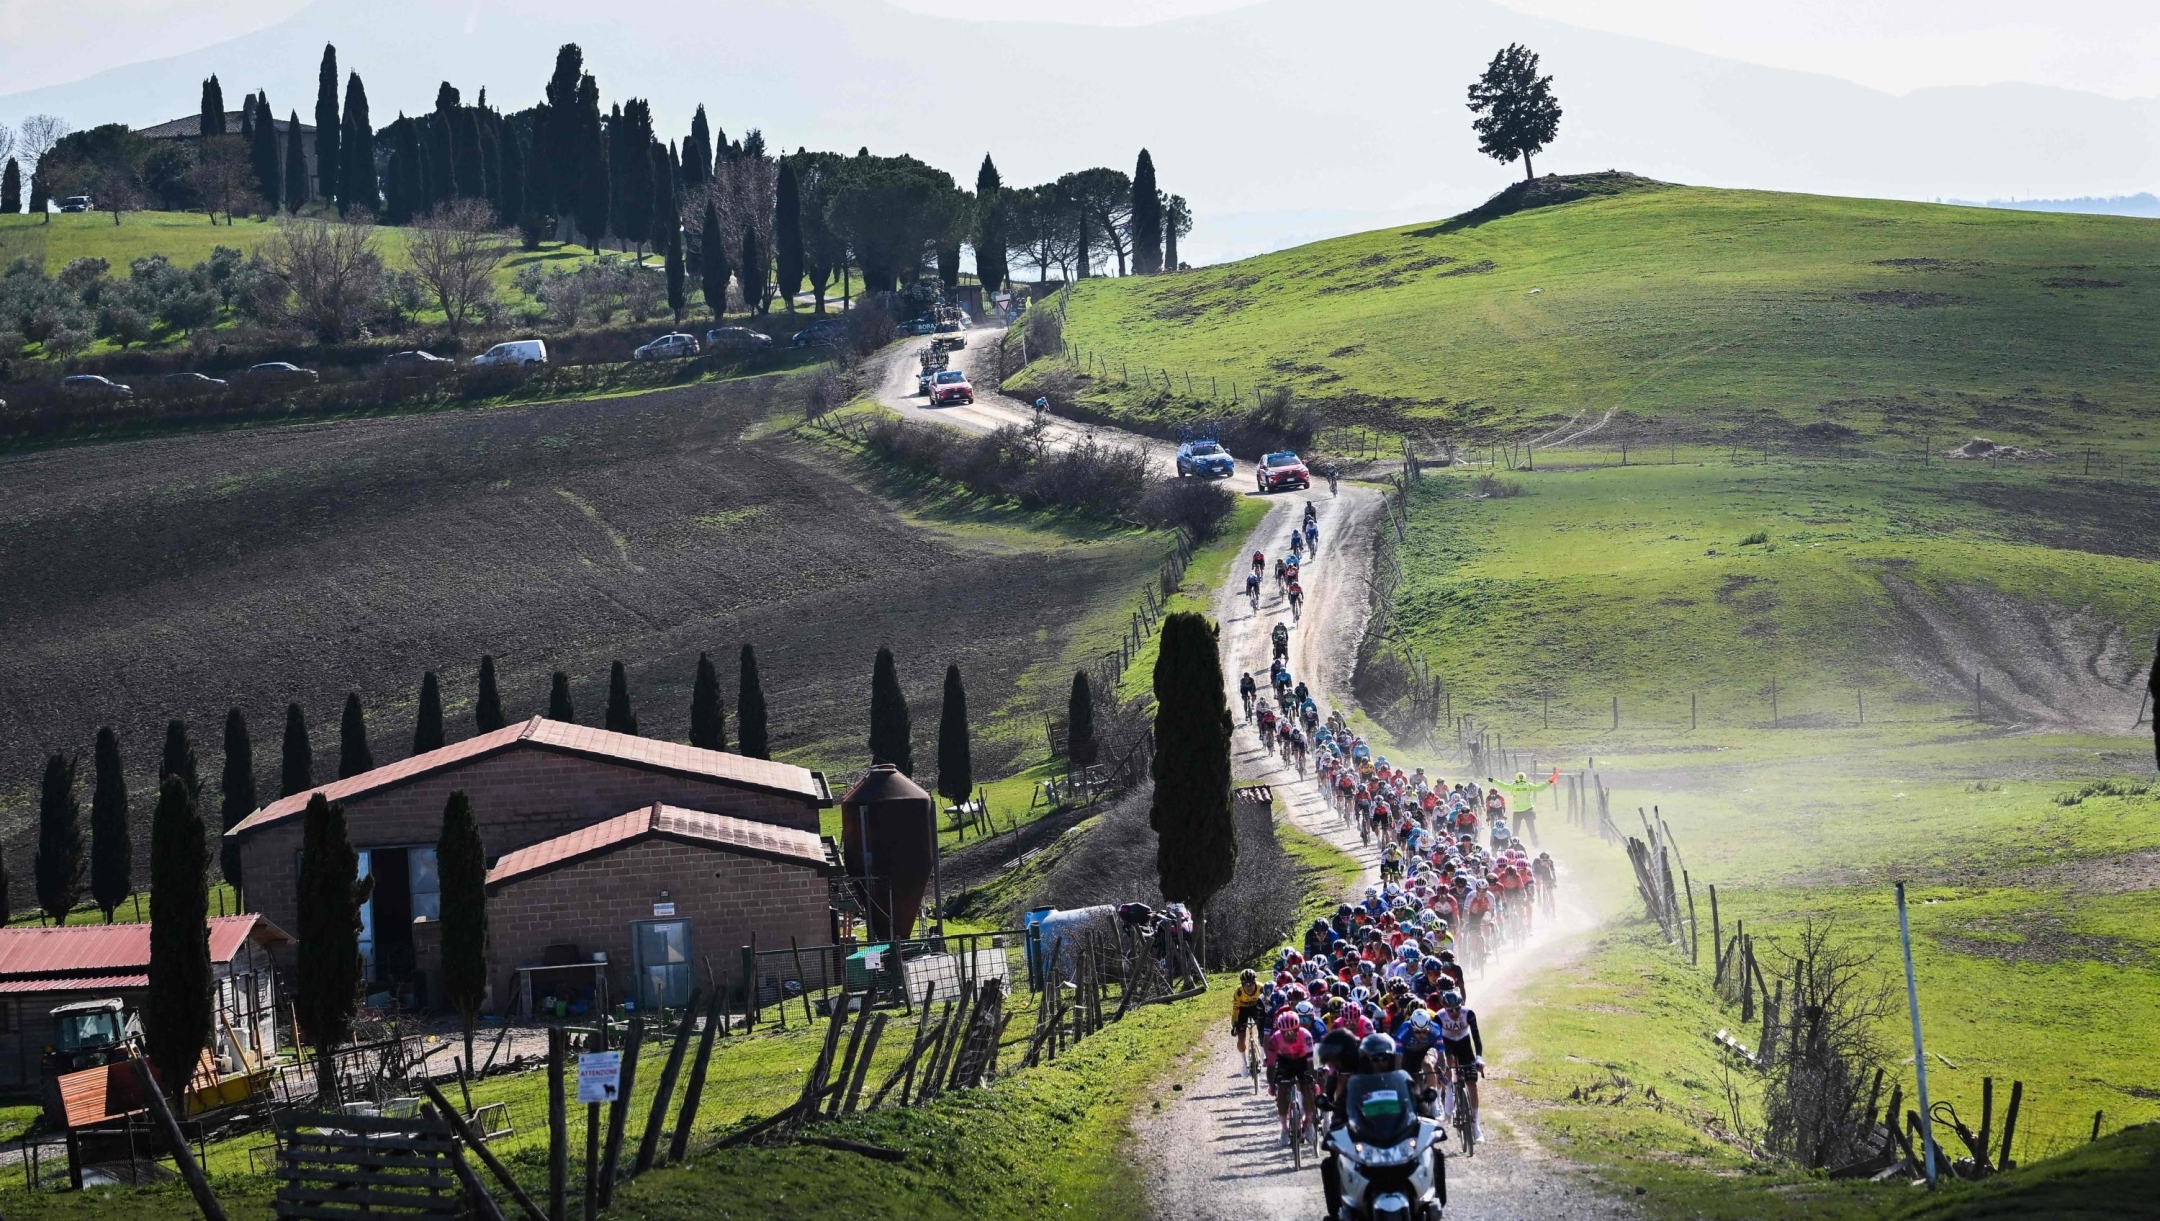 The pack rides during the 17th one-day classic 'Strade Bianche' (White Roads) cycling race, 184 km between Siena and Siena, Tuscany, on March 4, 2023. (Photo by Marco BERTORELLO / AFP)